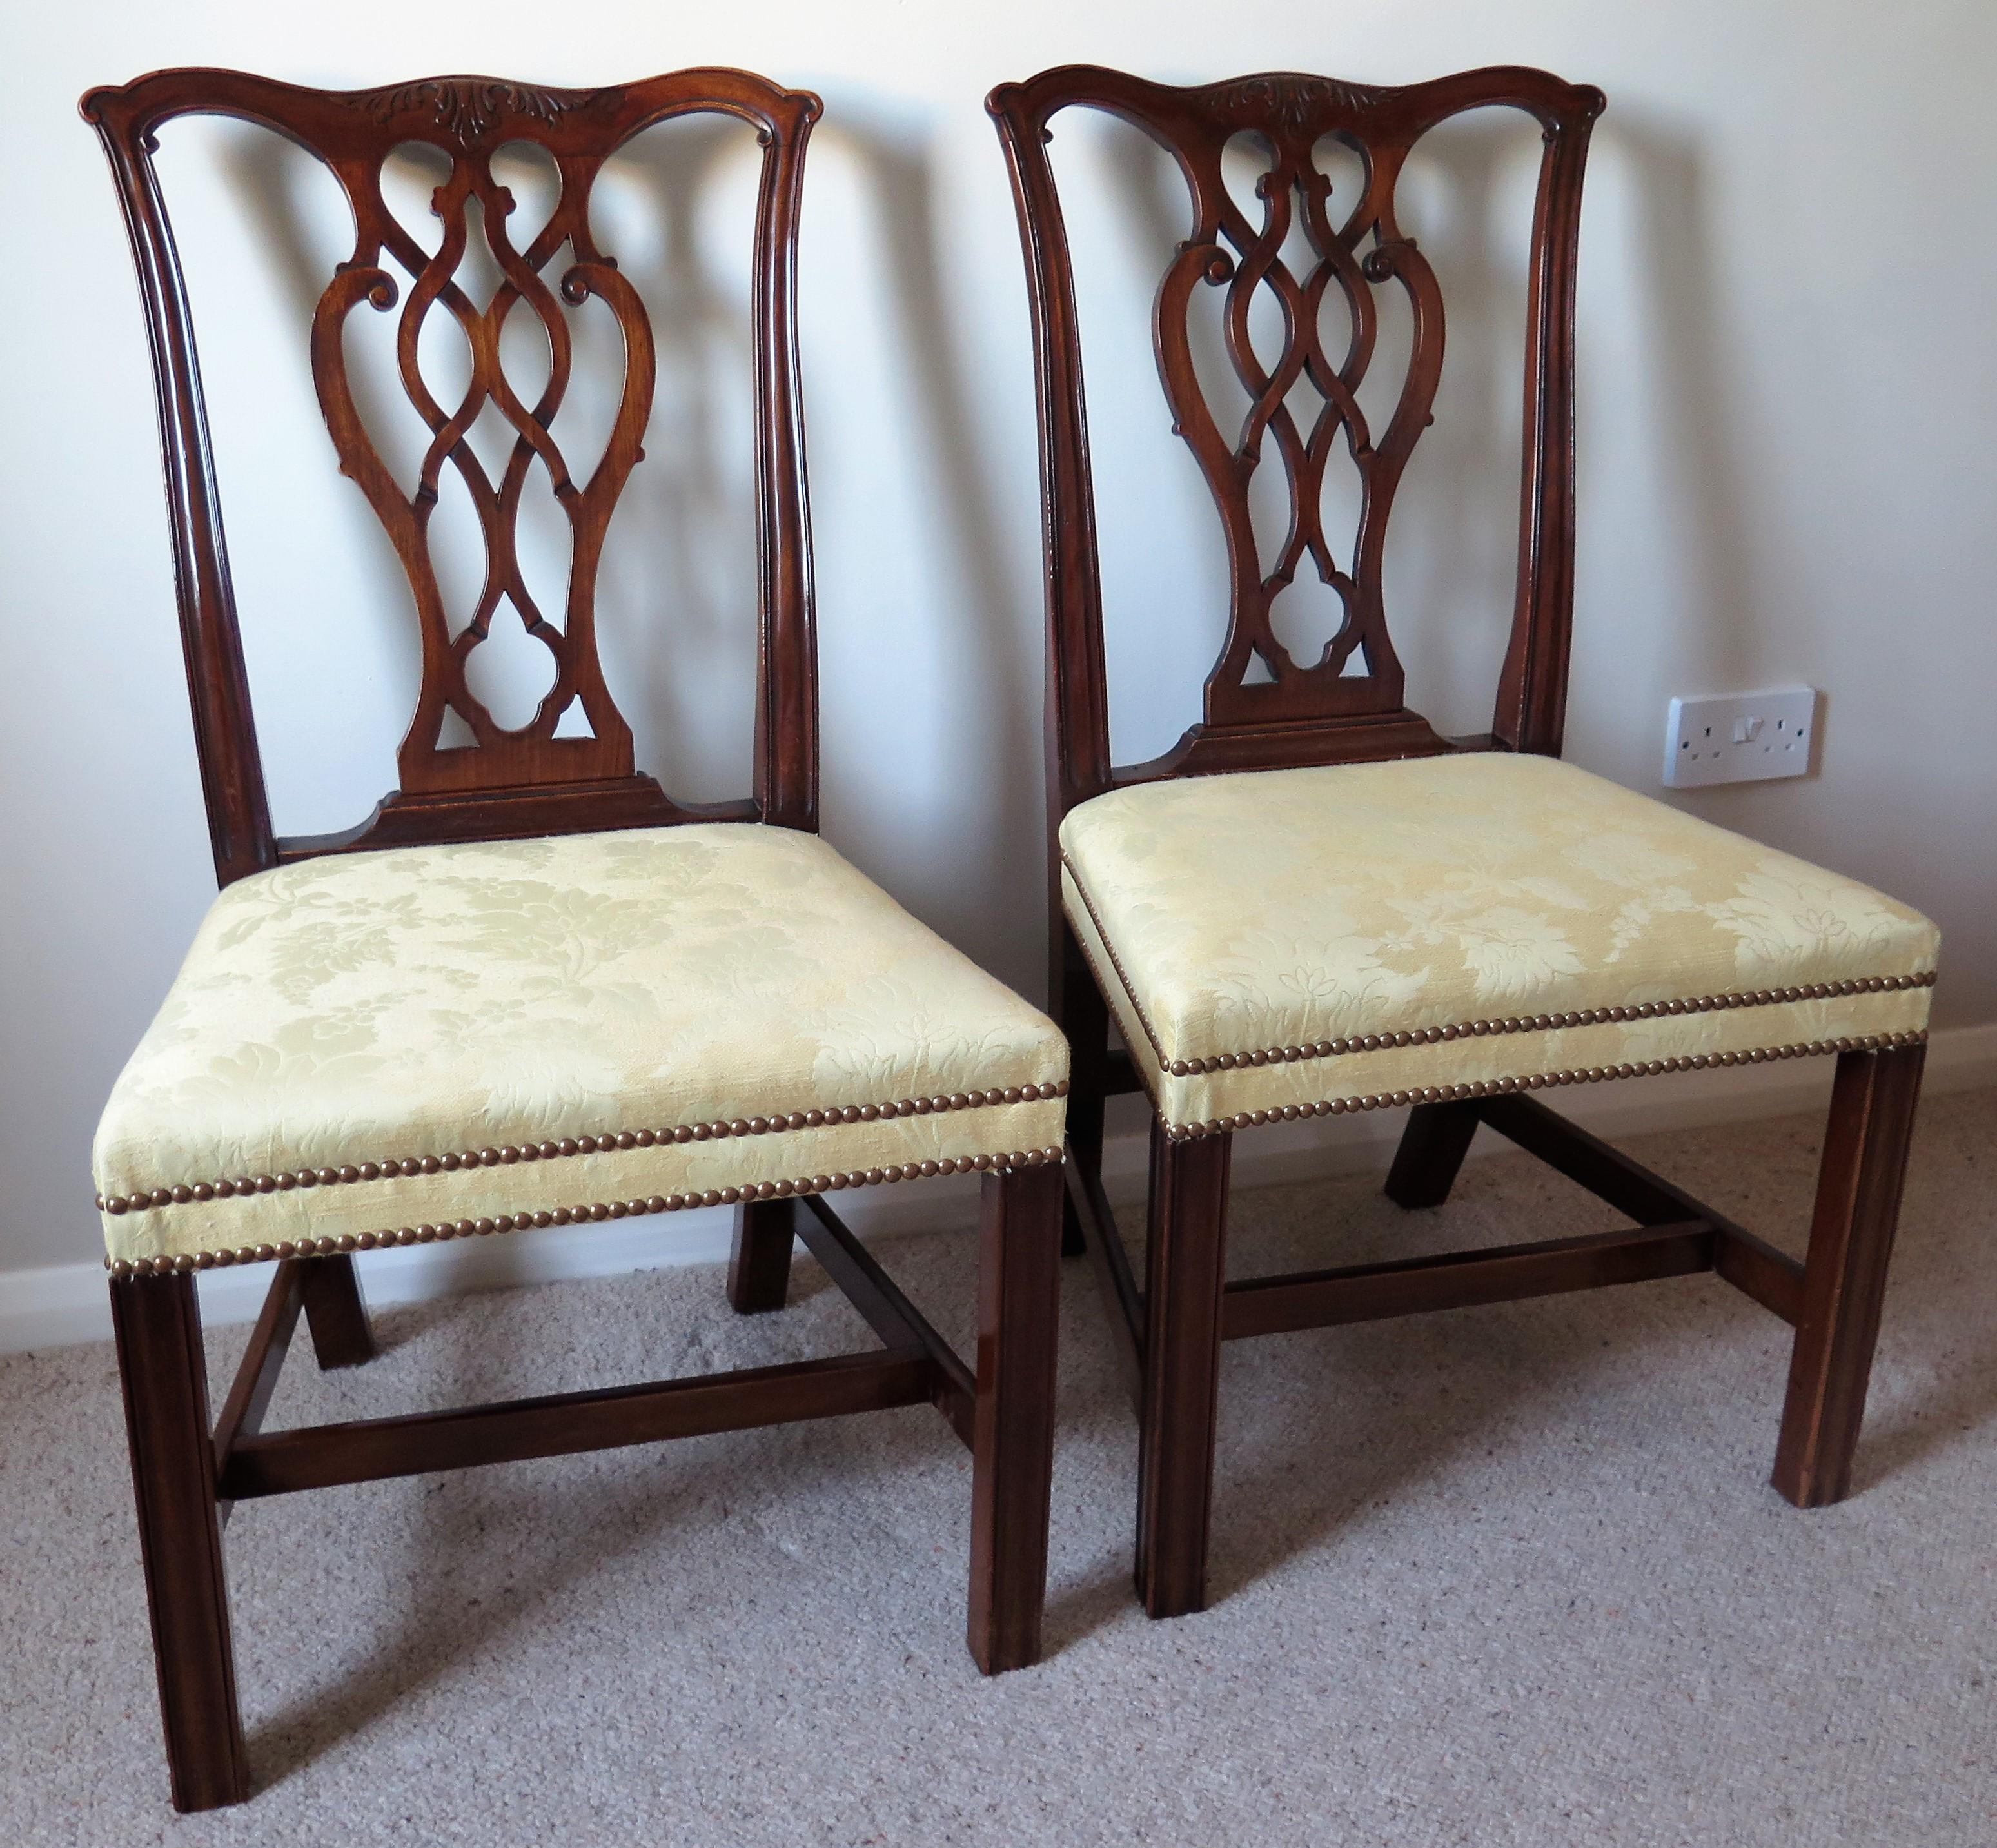 These are a superb pair of mahogany, Chippendale back, side or dining chairs which we date to the late 18th century, George 111rd period, circa 1770.

The chairs have a very well carved 